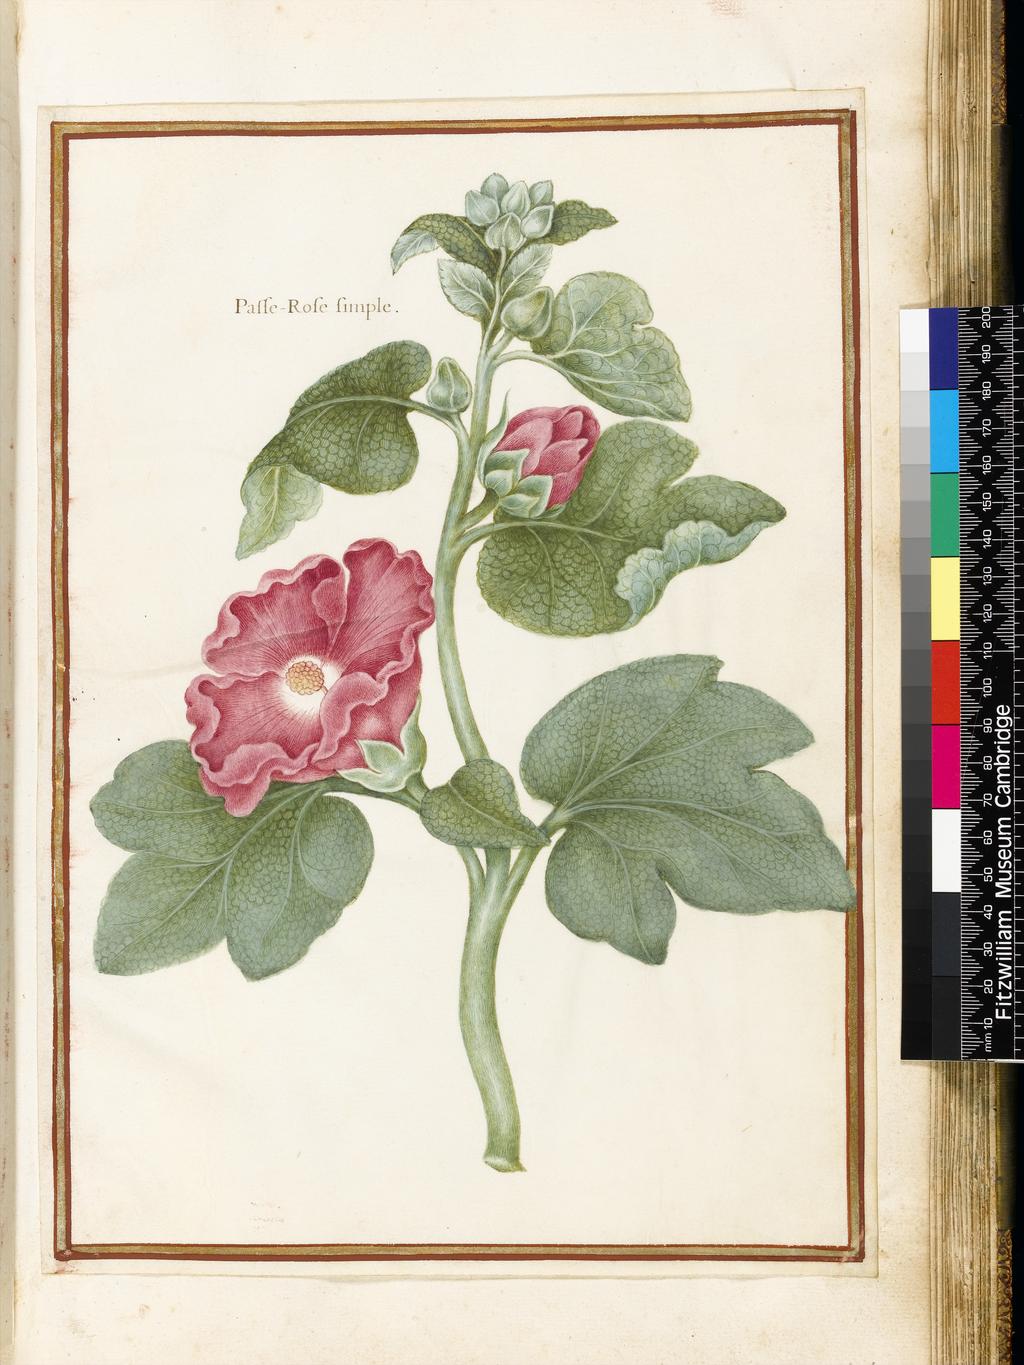 An image of Stylized study of Althaea rosea (Hollyhock) (assigned title). Robert, Nicolas attributed to (French, 1614-1685). Watercolour and bodycolour on vellum, height 322 mm, width 227 mm. Album containing 62 botanical drawings on vellum tipped in on the gilt-edged pages of the album which bear the watermark of an 18th century French paper-maker, Malmenayde of Thiers (active from 1731). Bound in red morocco with clasps, the spine tooled in gilt. The Pages are interleaved with thin protective paper. Ruled lines of red and gold border the drawings on all sides. 17th Century. French.